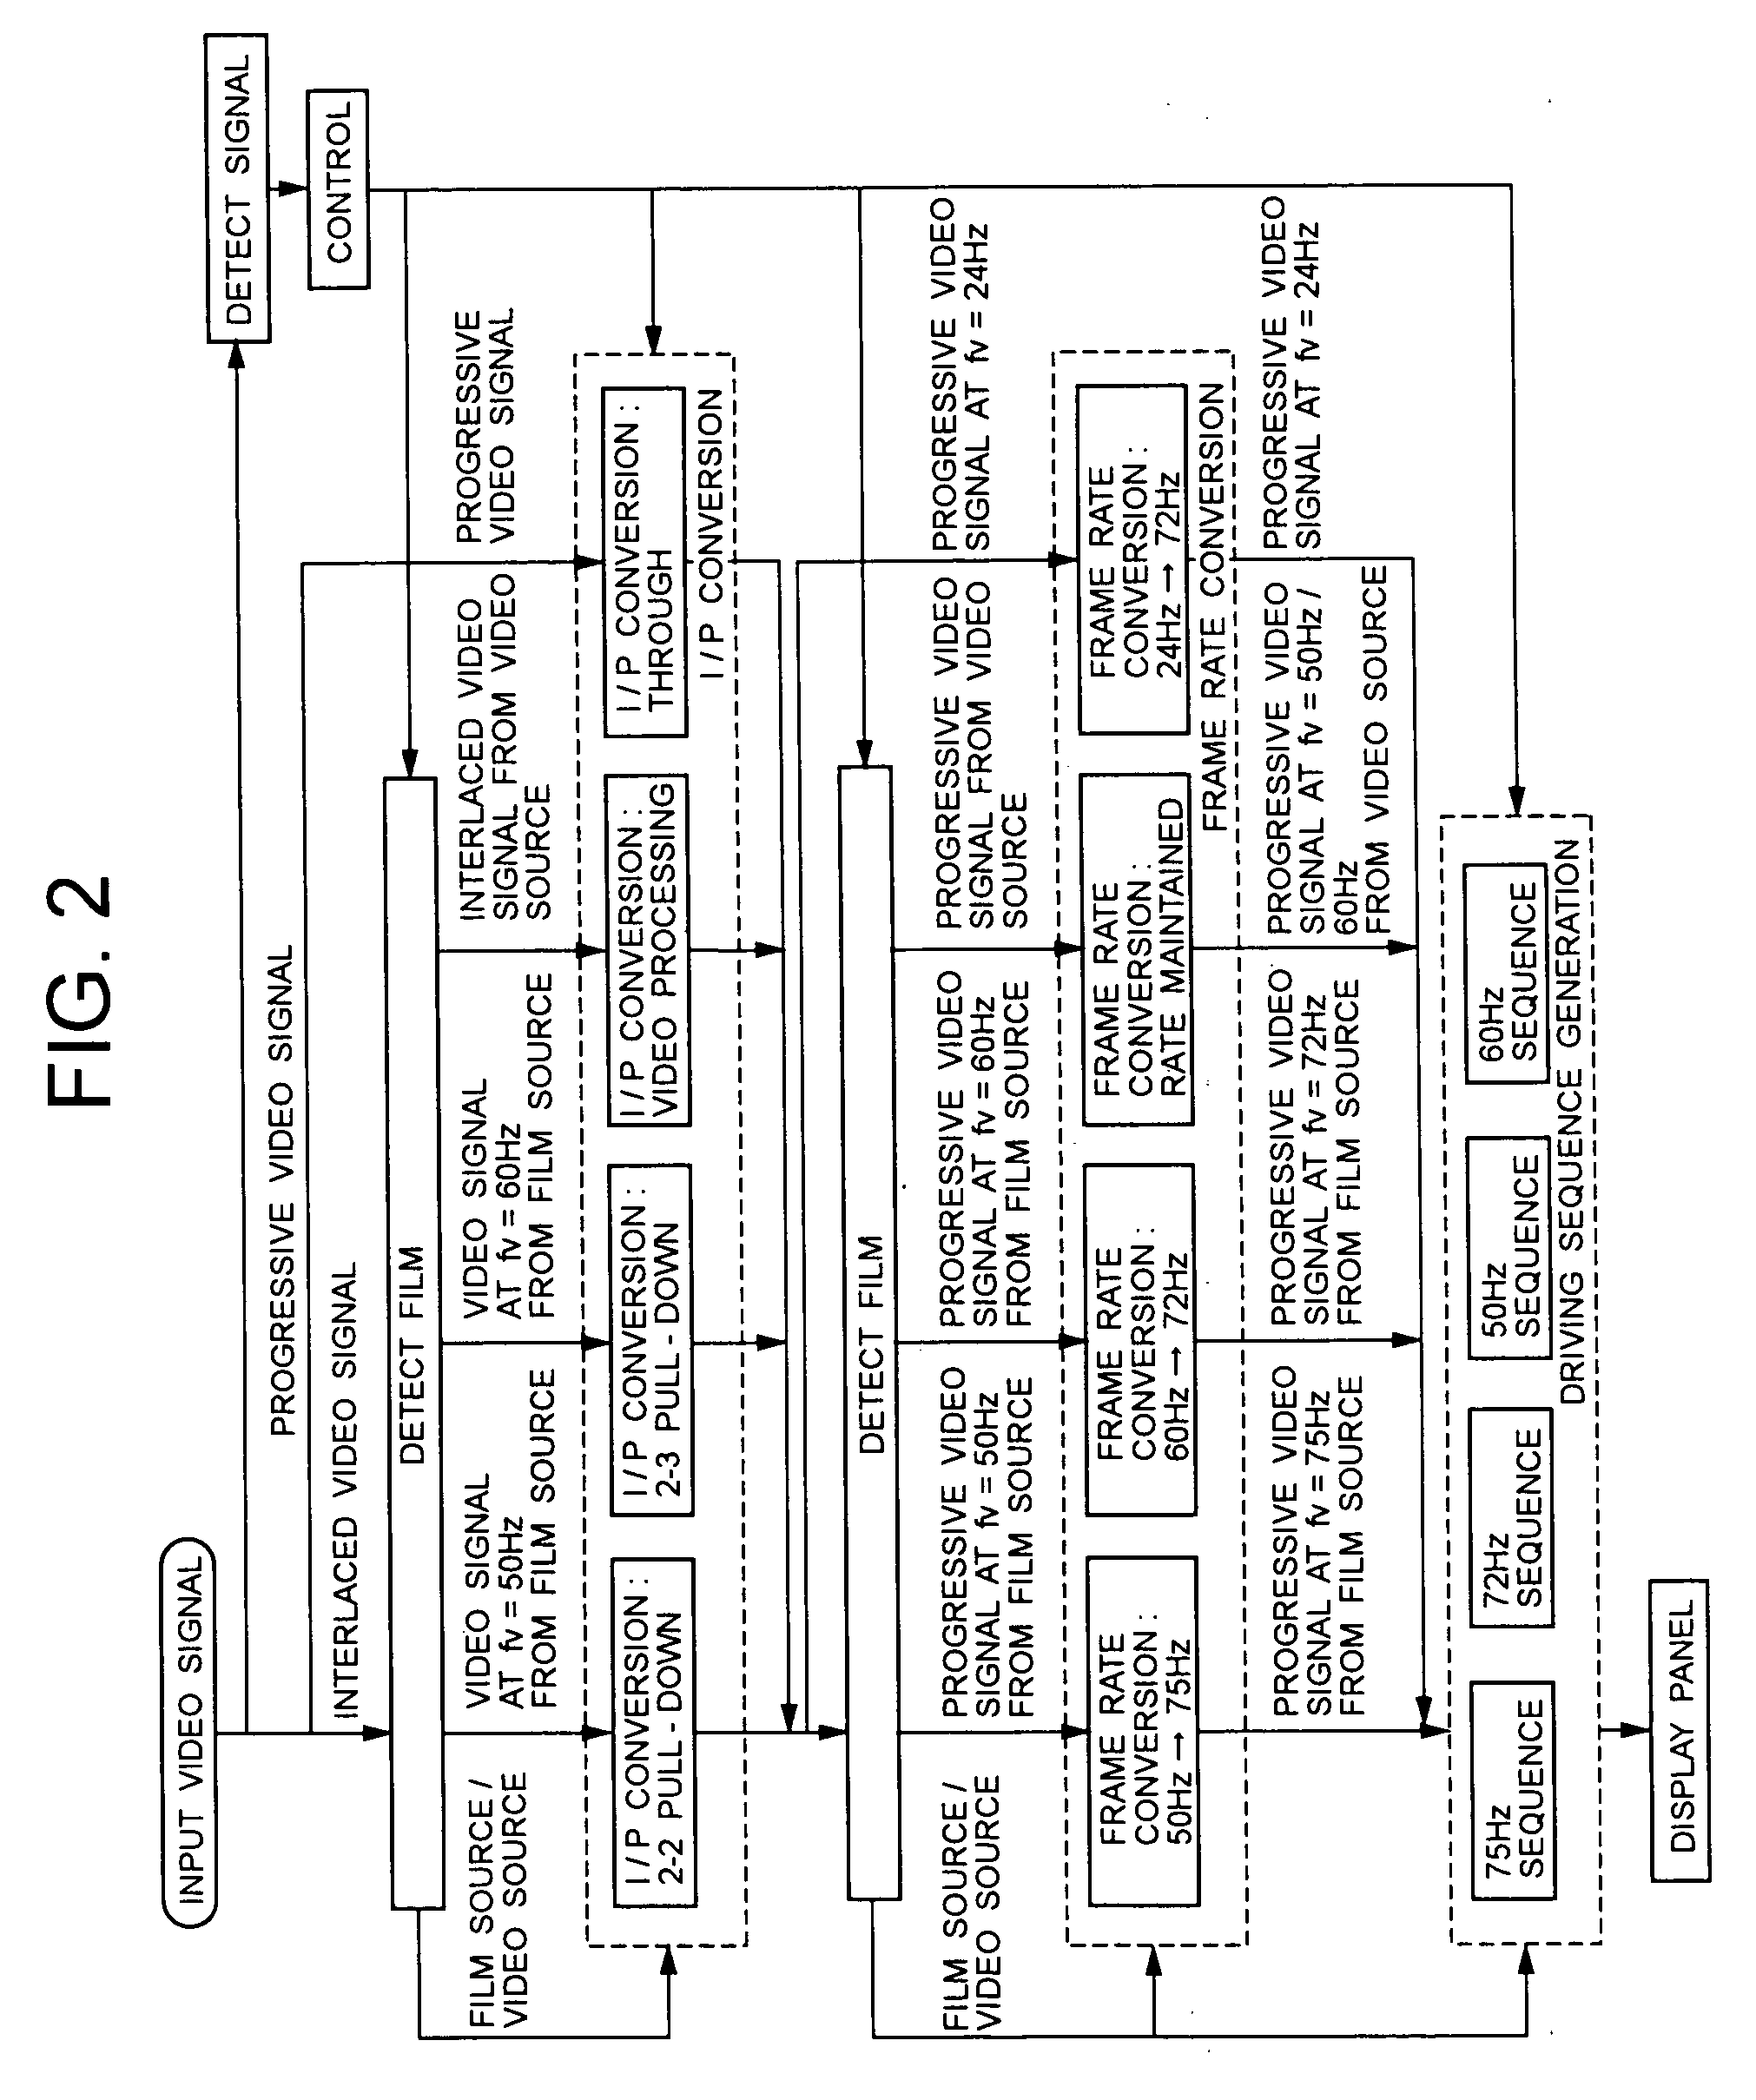 Video signal converting apparatus and method